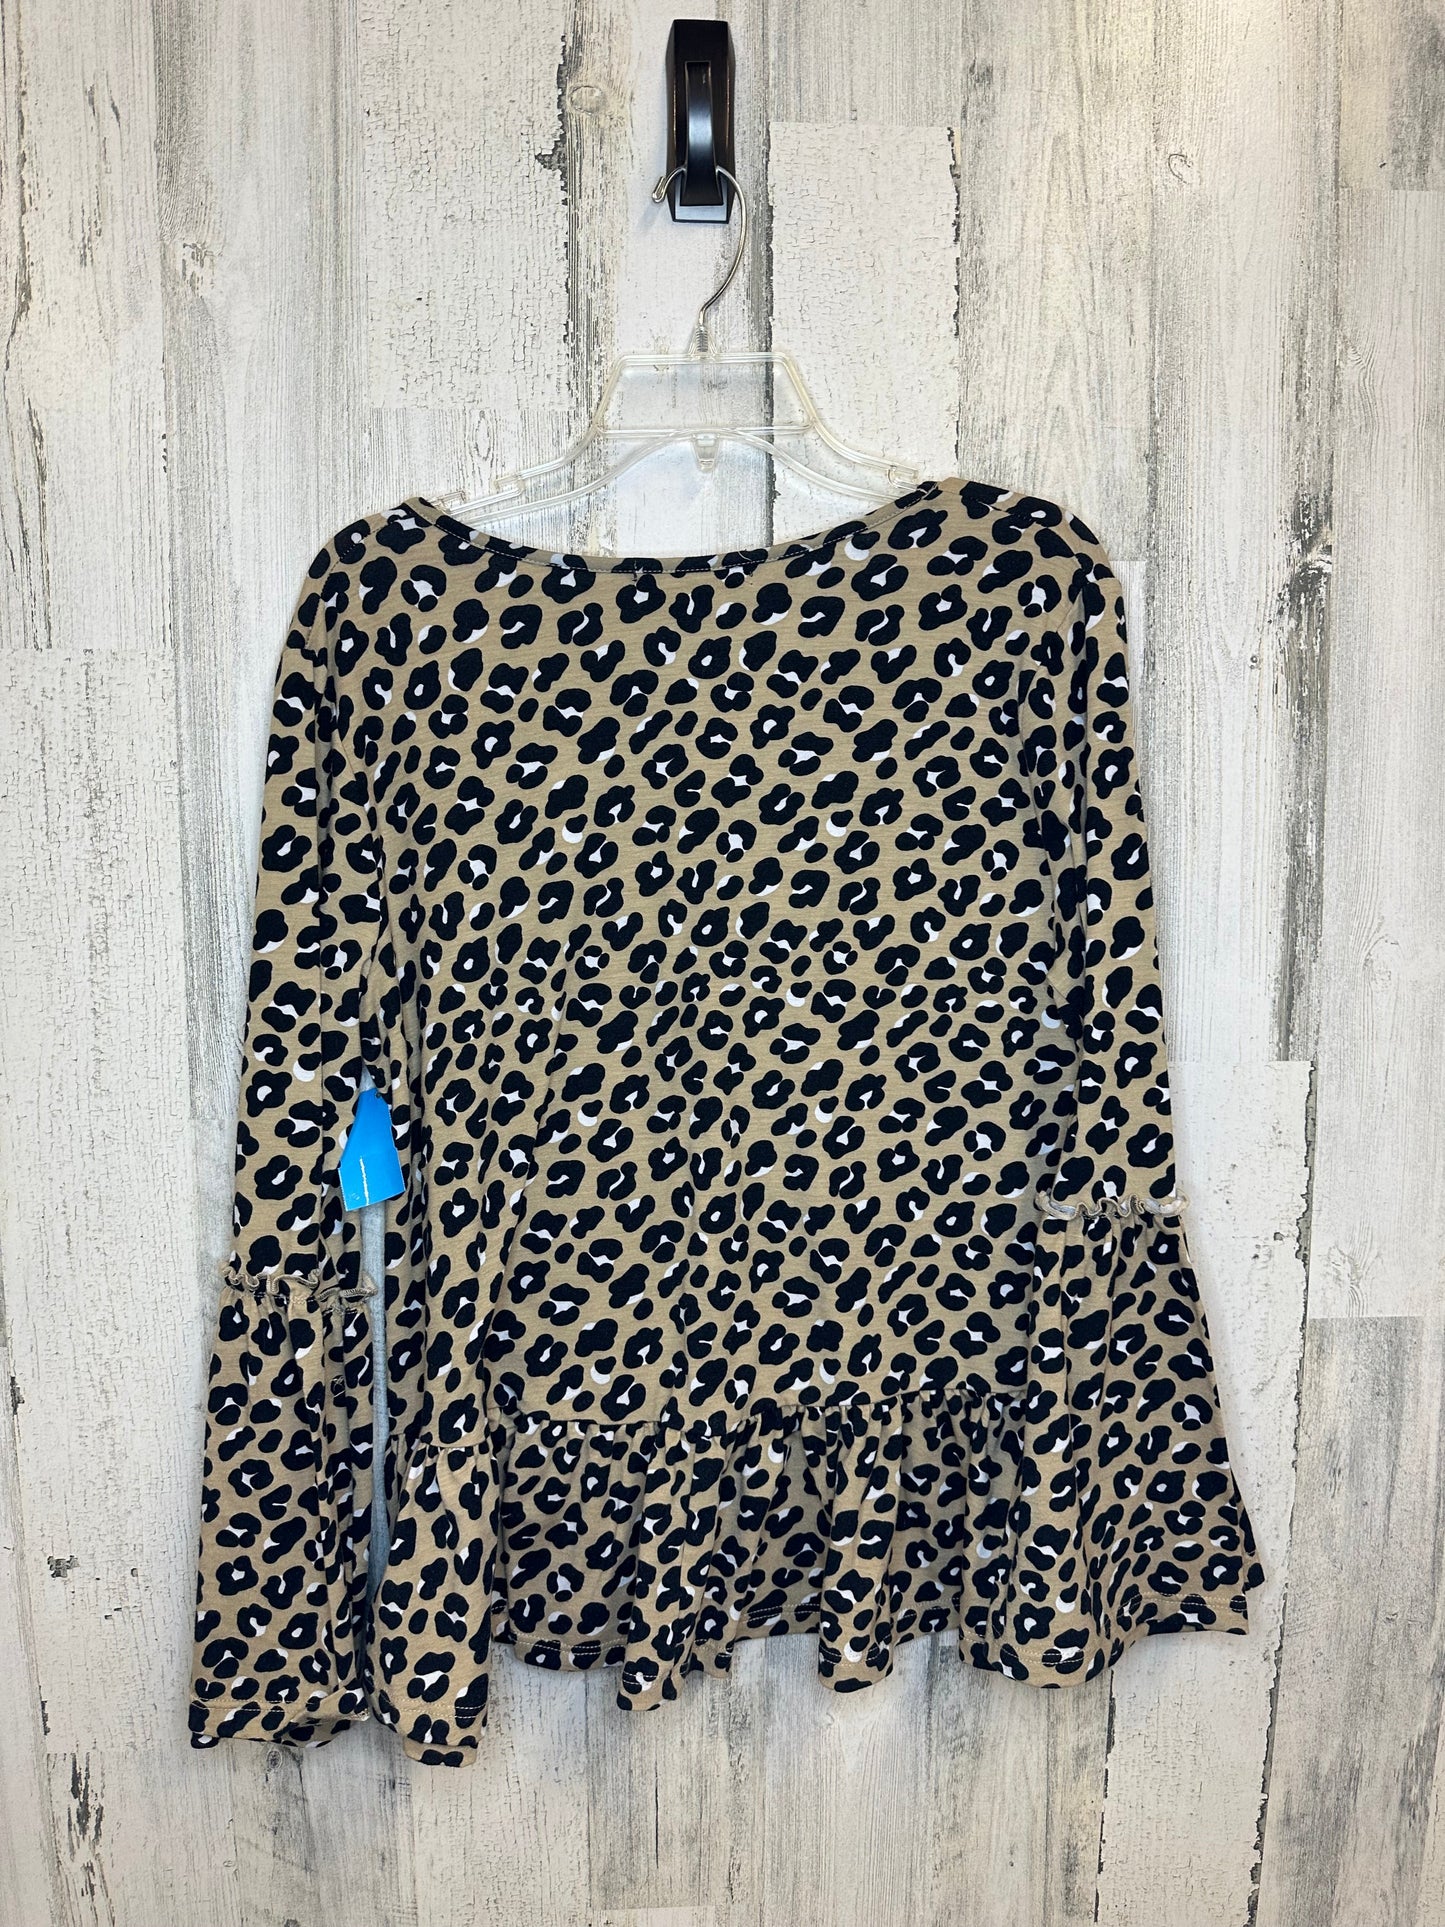 Top Long Sleeve Basic By Simply Southern  Size: L